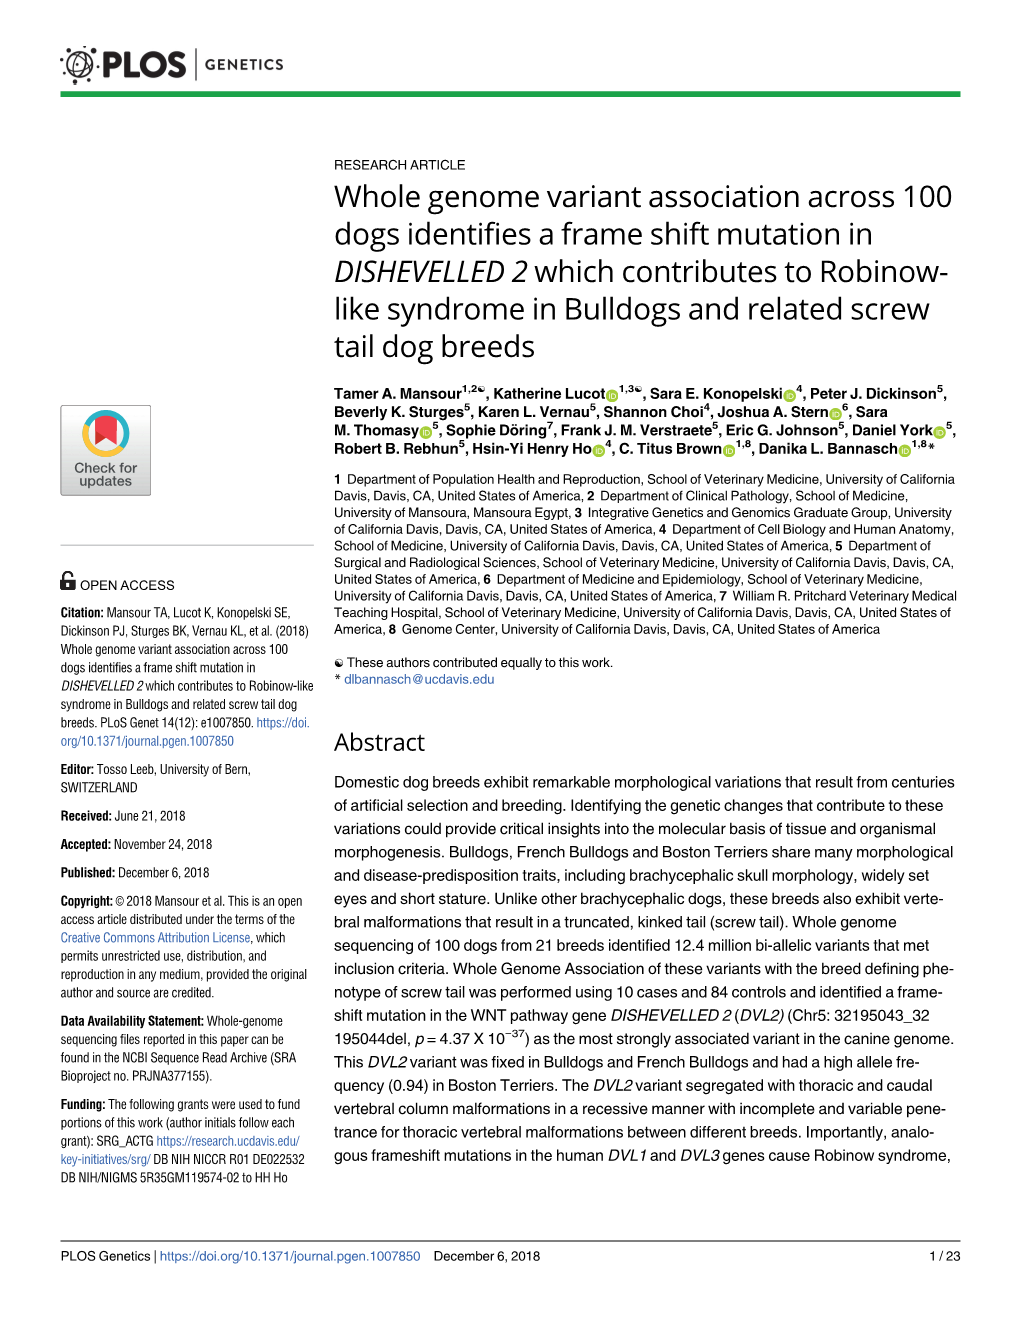 Whole Genome Variant Association Across 100 Dogs Identifies a Frame